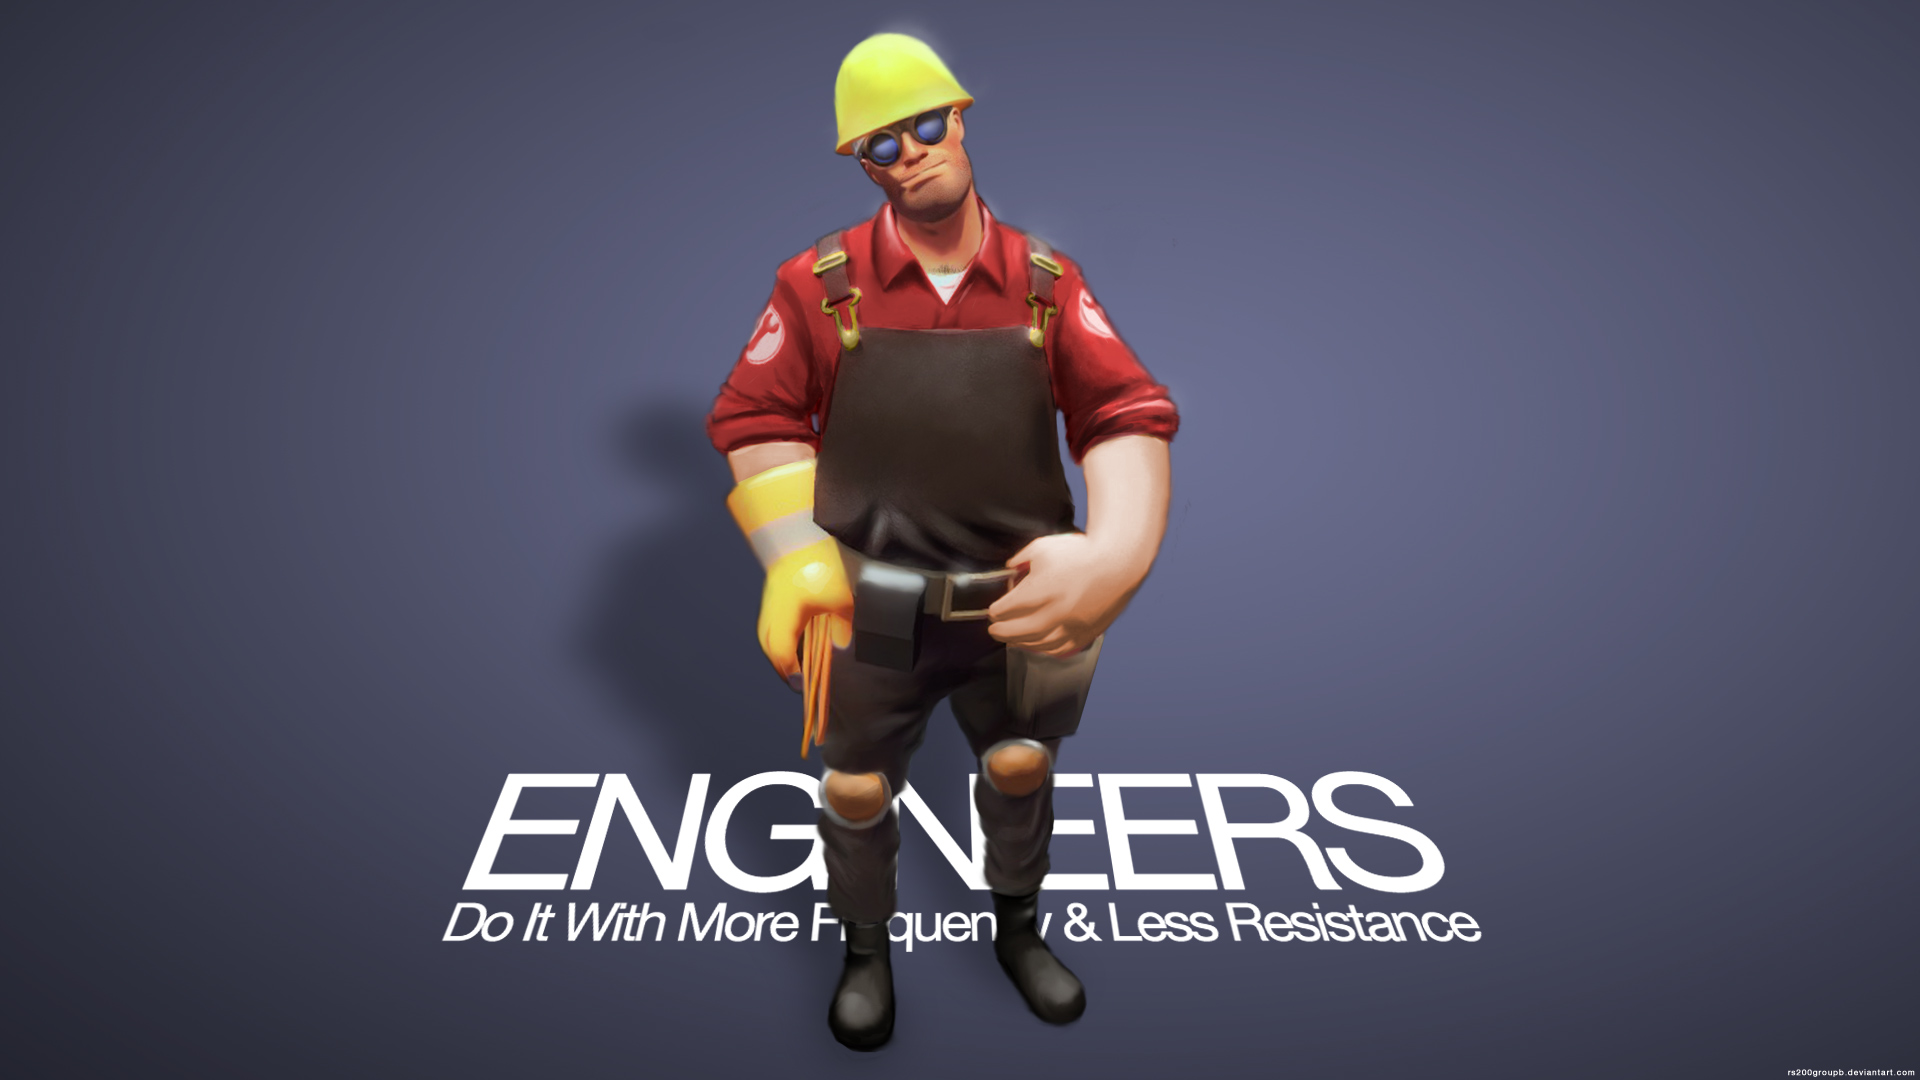 94 Team Fortress 2 Engineer Wallpapers Wallpaper Cave Team